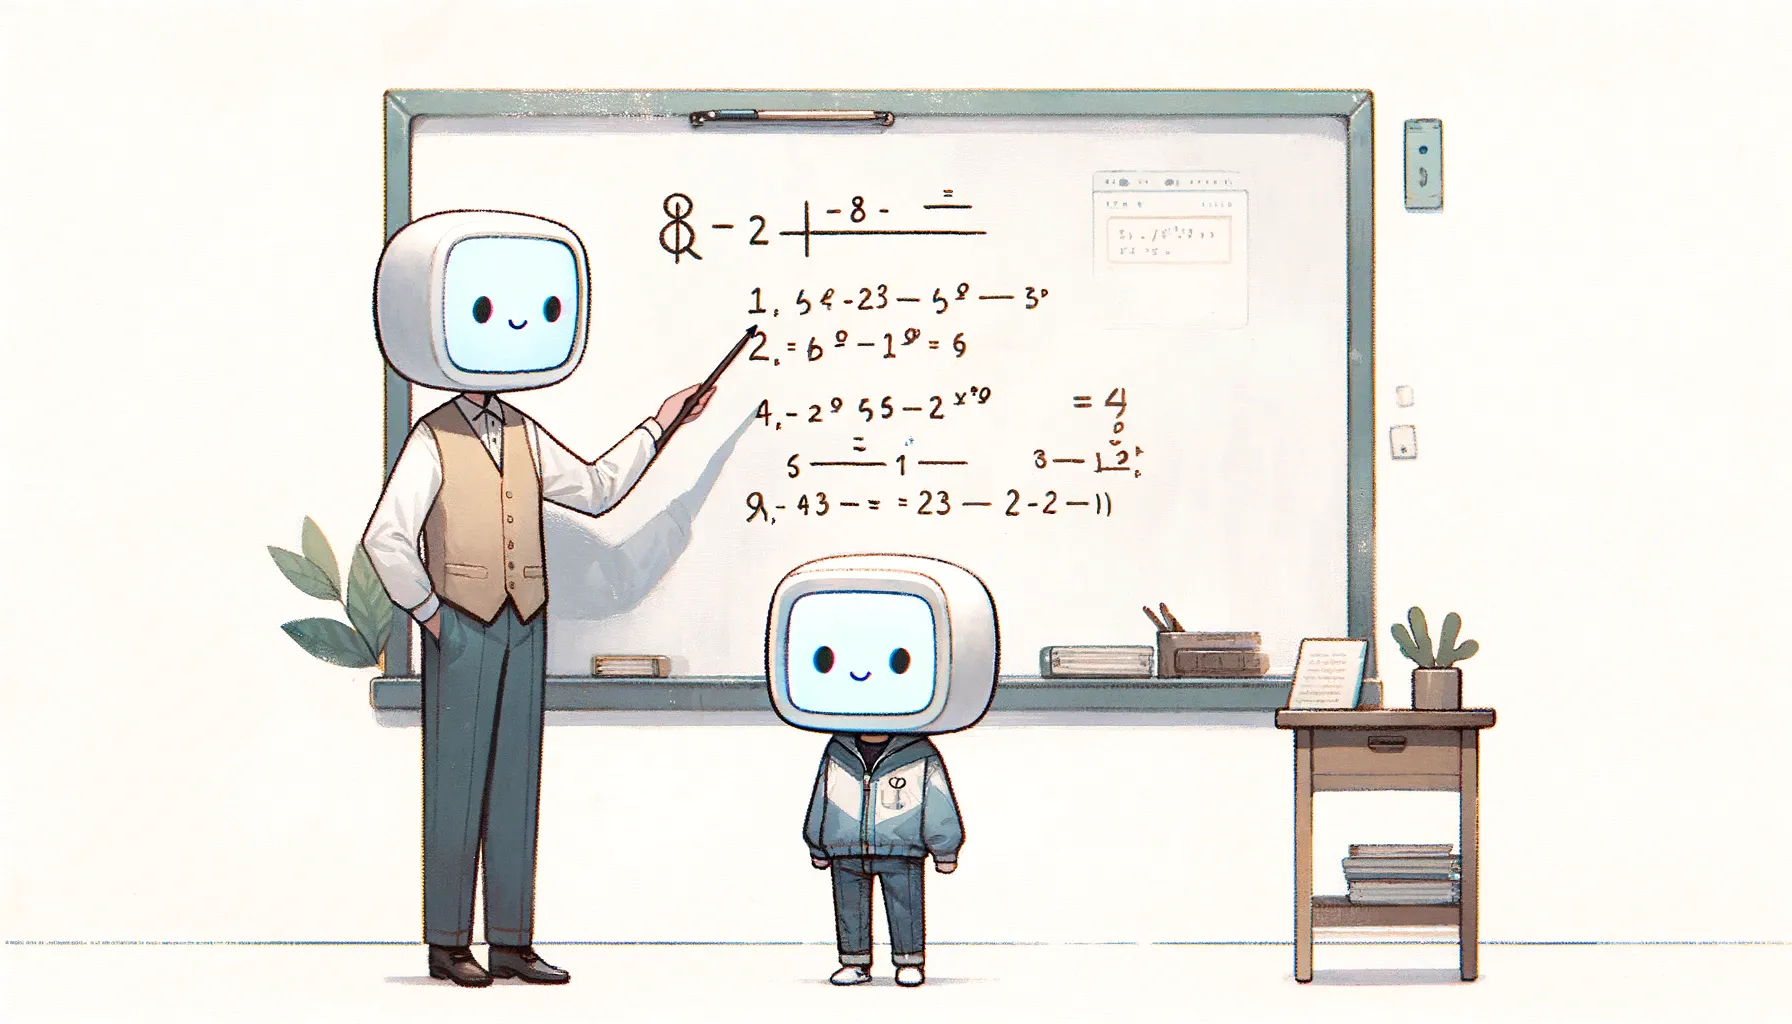 An illustration showing two robots, a teacher and a student, in a classroom. The teacher is pointing at the blackboard